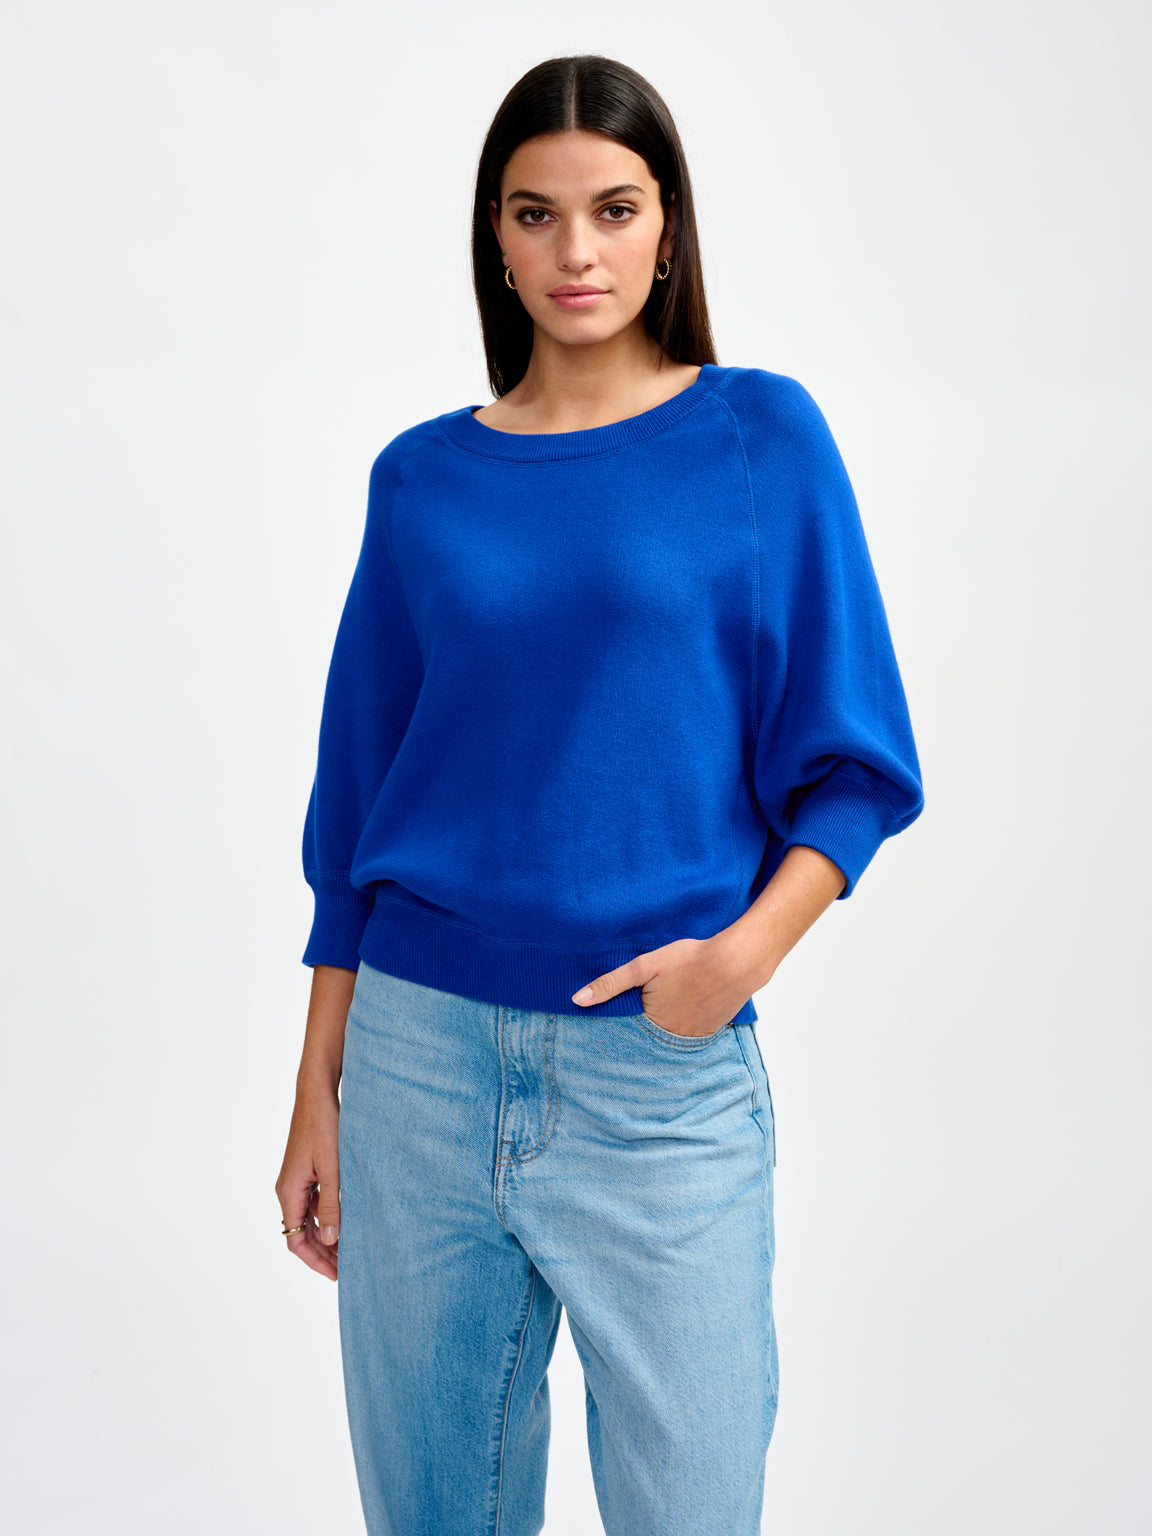 Anglet Sweater - Blue | Women Collection | Bellerose